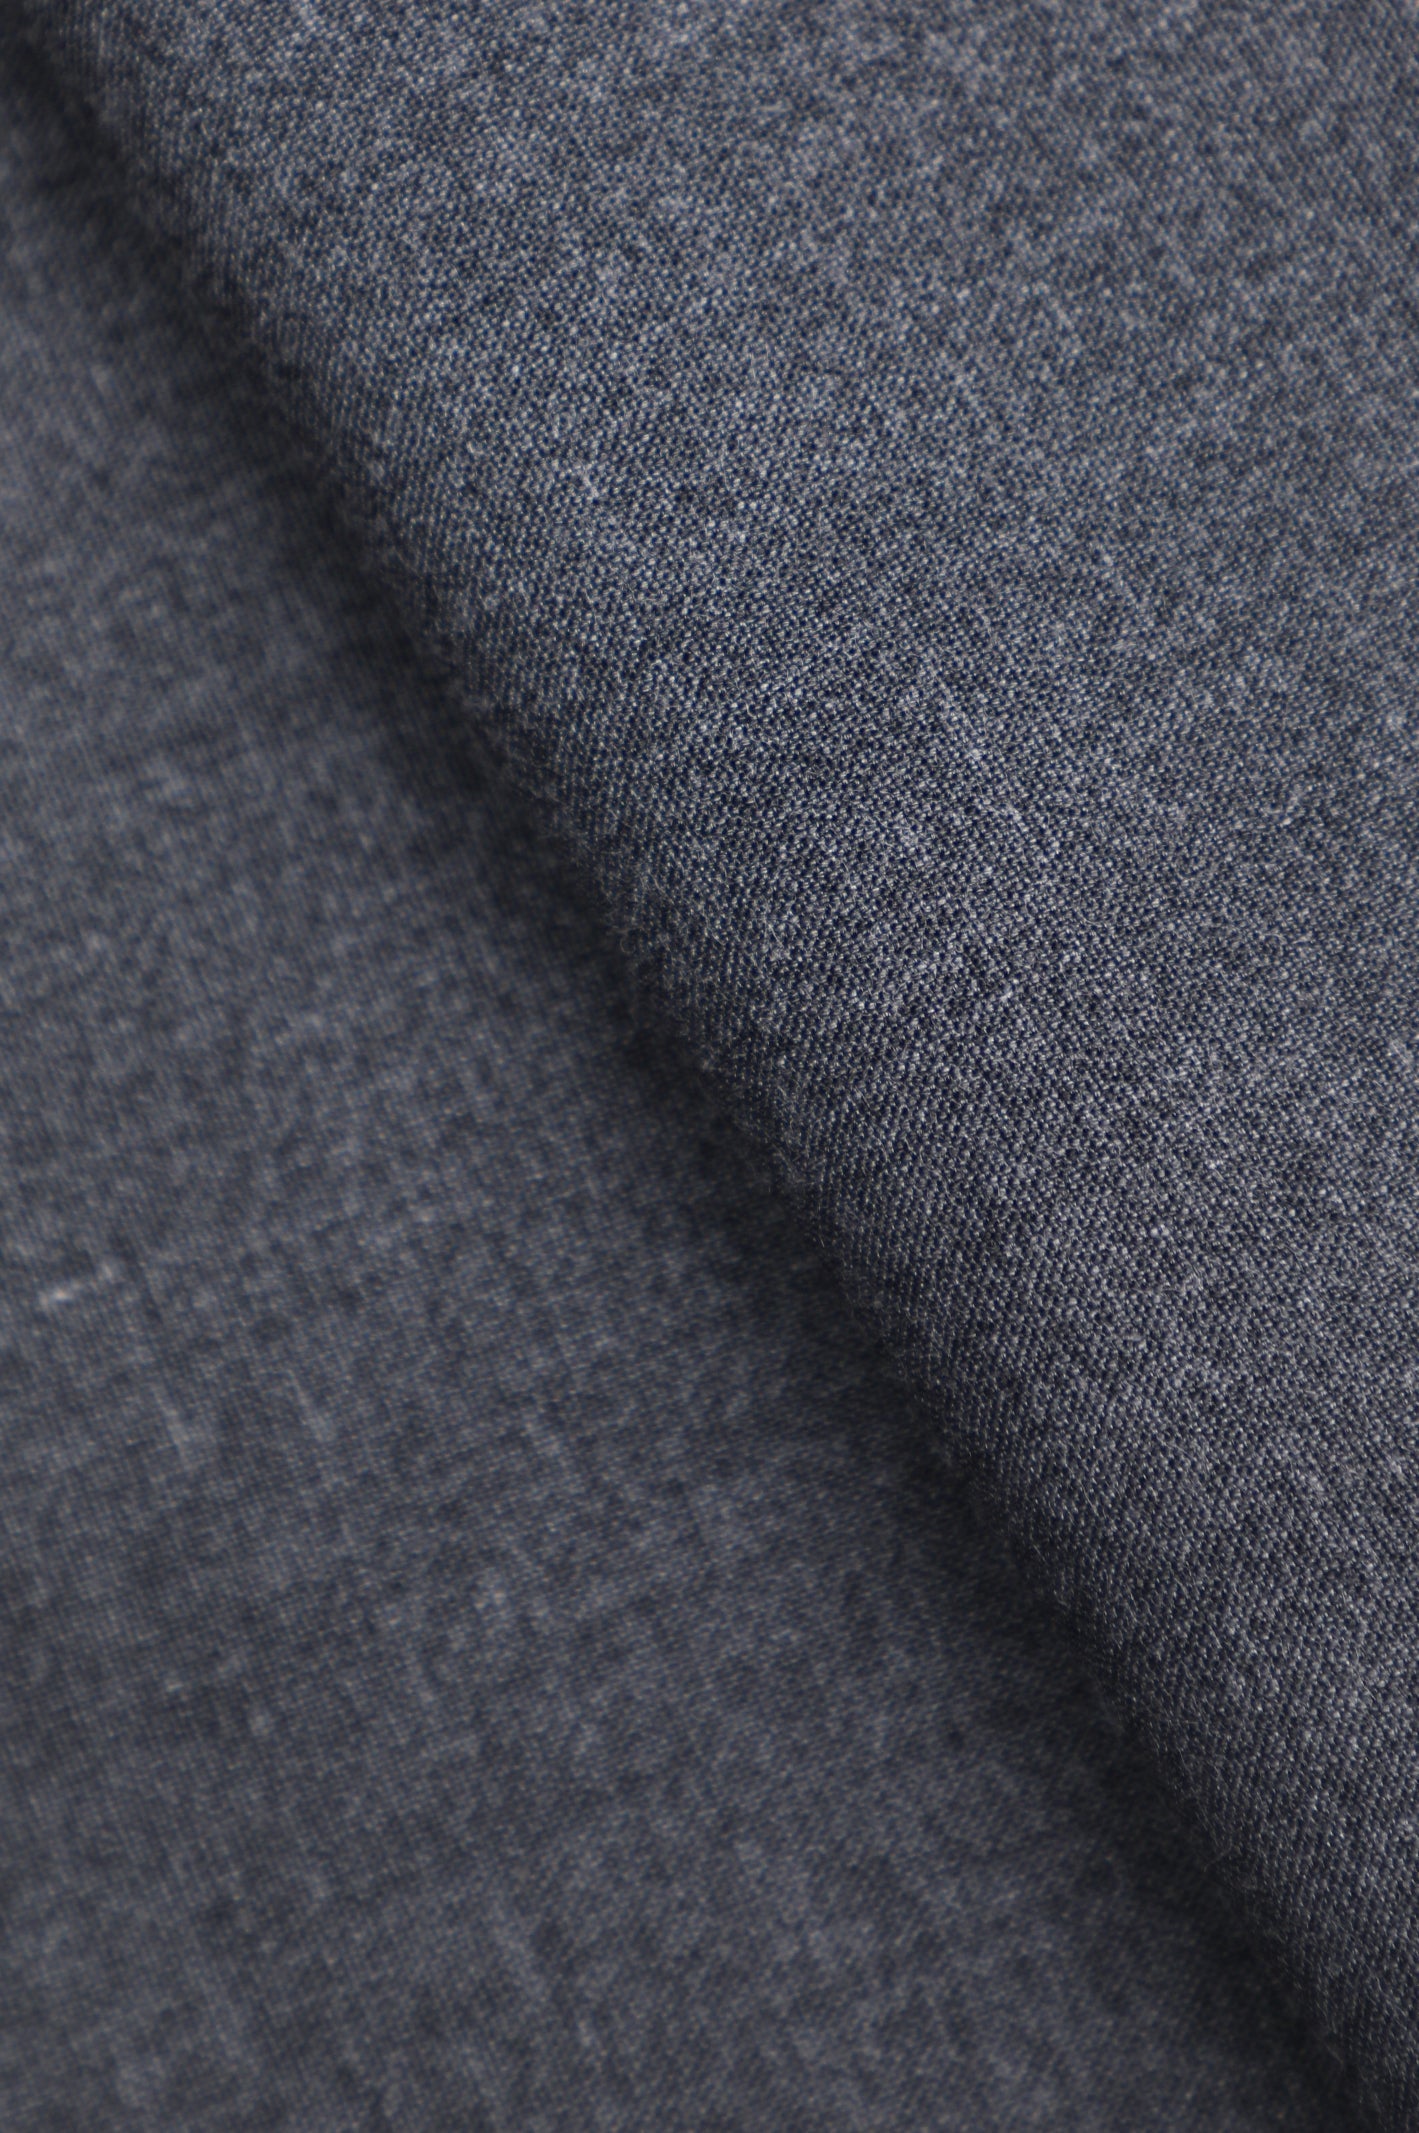 Unstitched Fabric for Men SKU: US0200-CHARCOAL - Diners